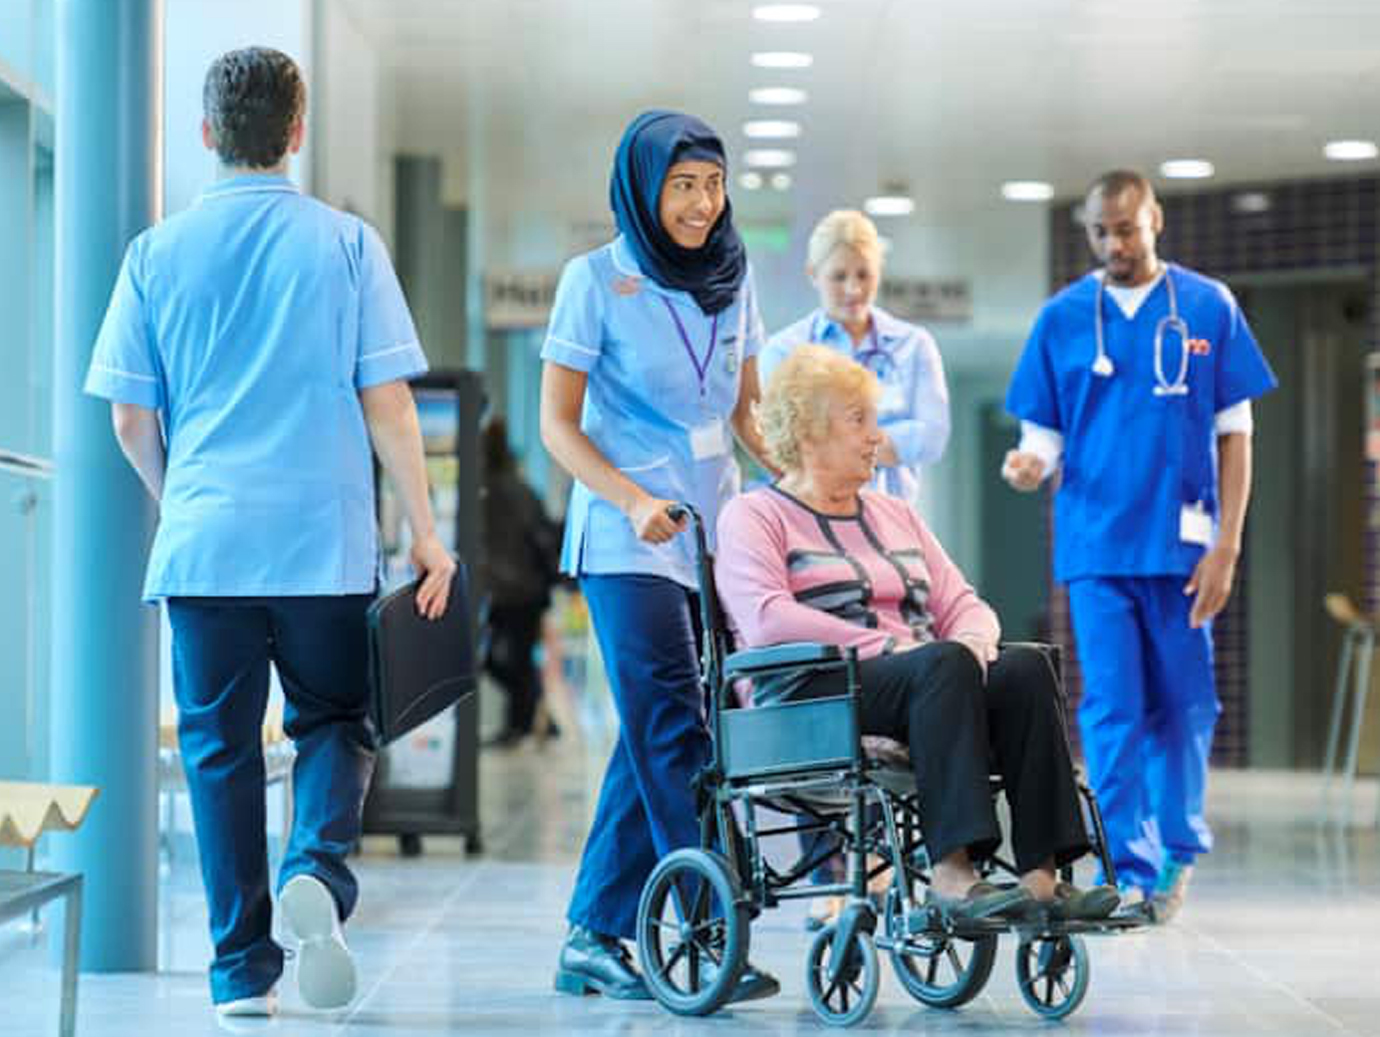 Nurse pushing an elderly man's wheelchair, while doctors and nurses walk in the background 